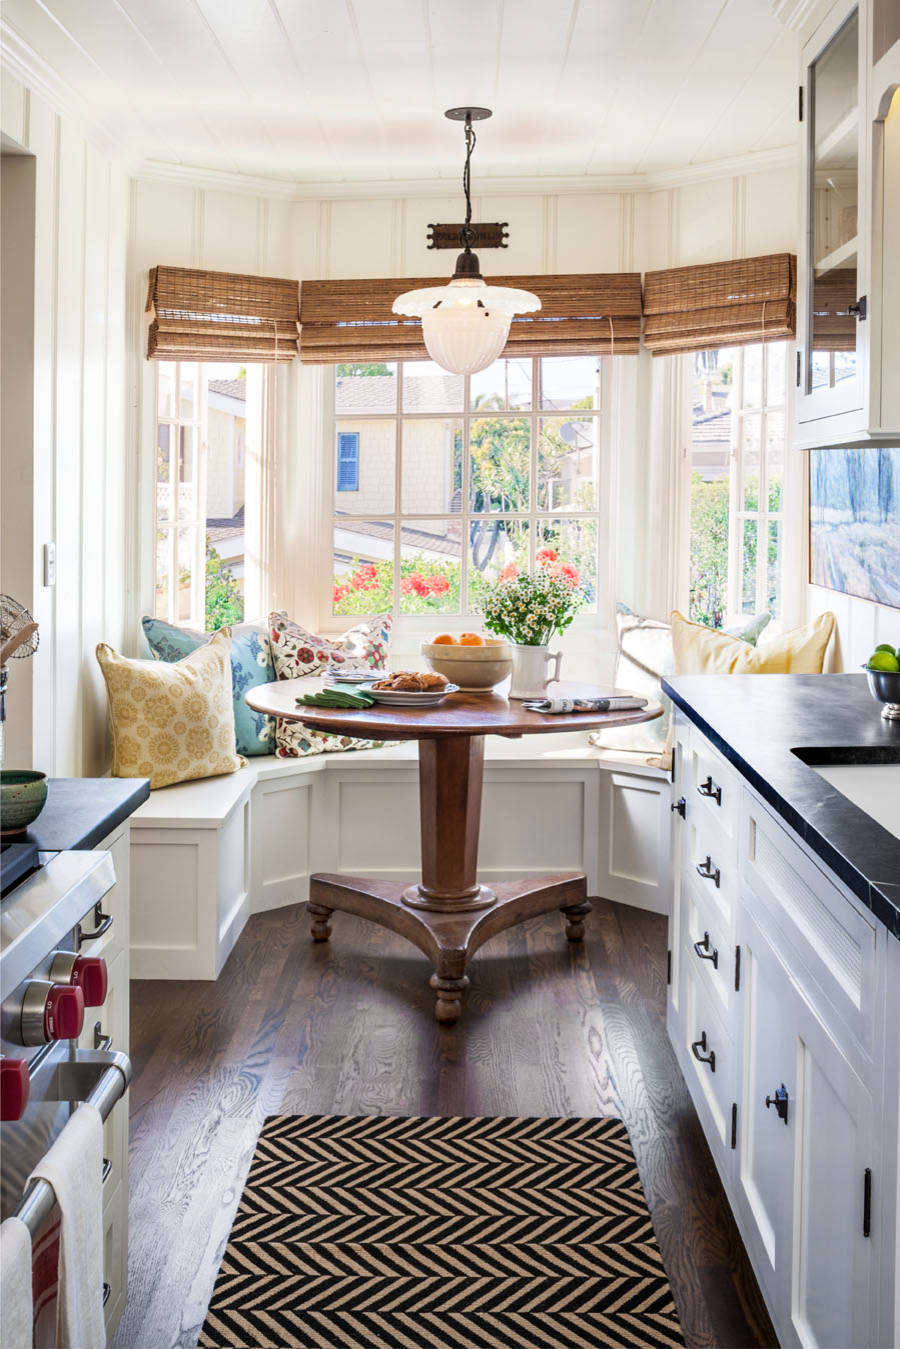 Kitchen Dining Room Small : 51 Small Kitchen Design Ideas That Make The